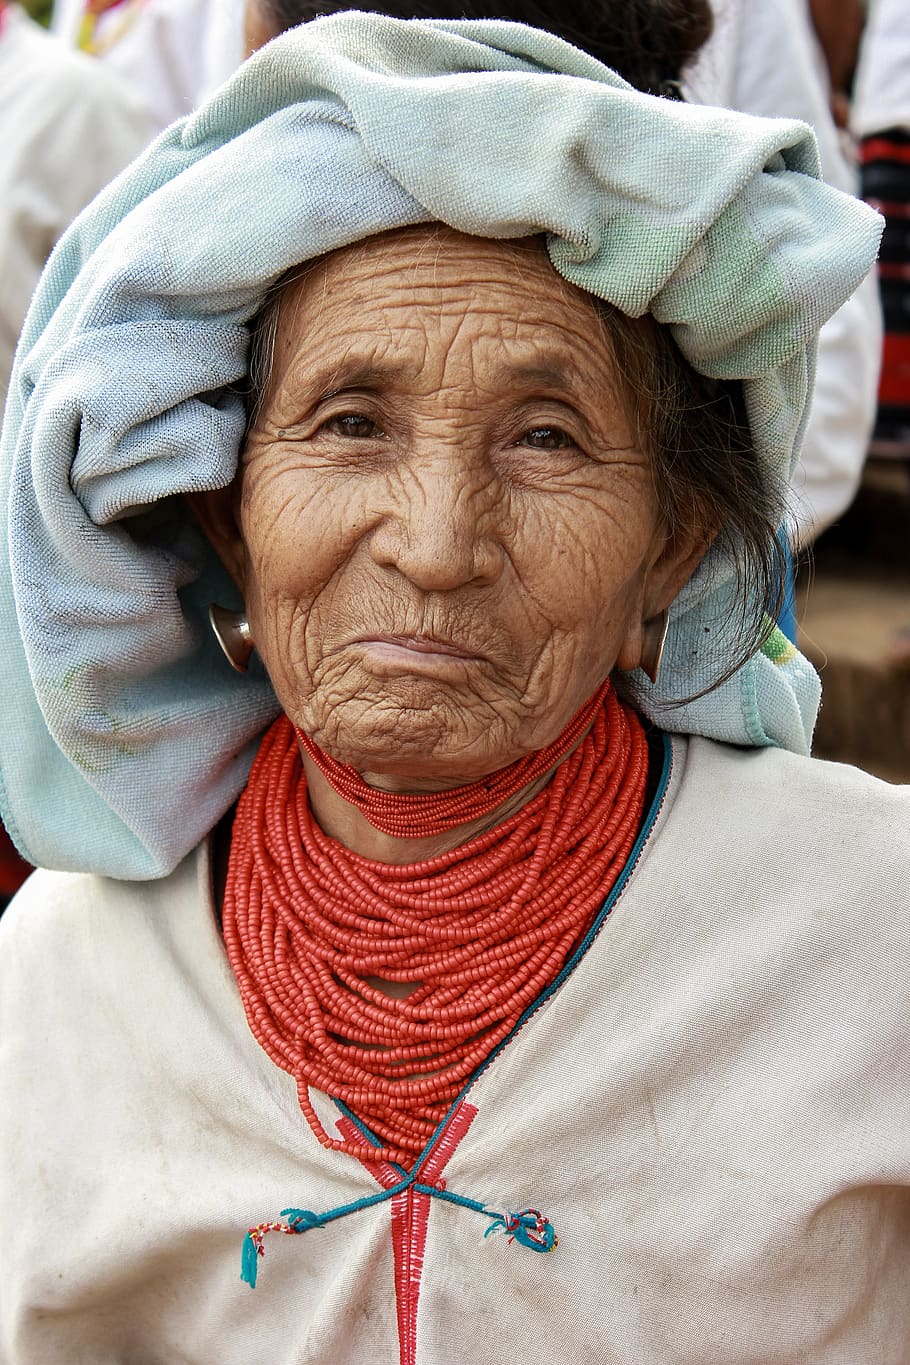 lua tribe, old, smile, people, image, lady, happy, happiness